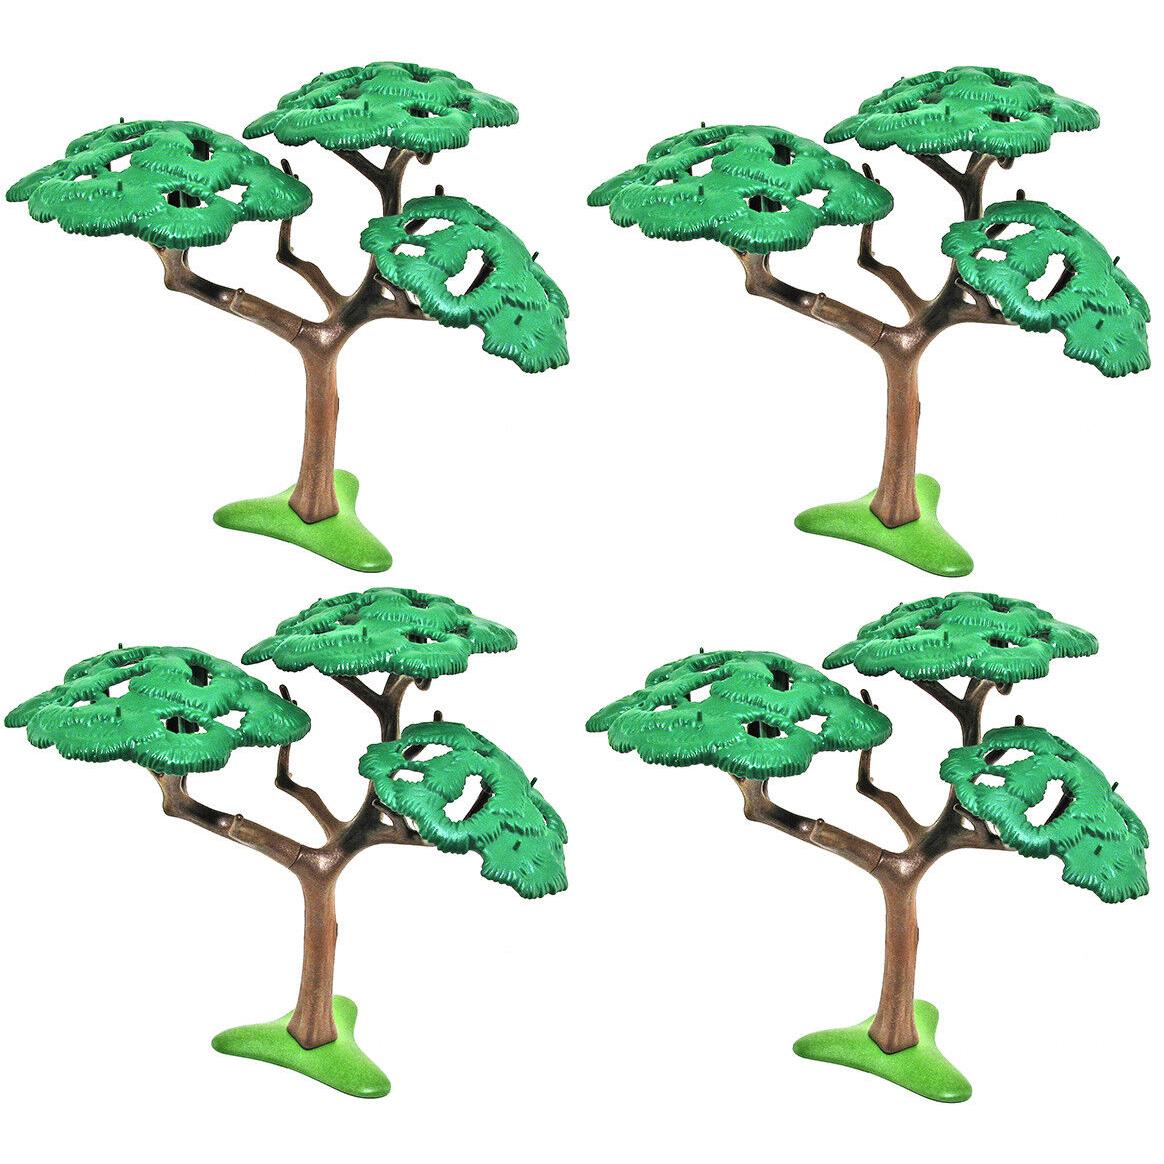 Playmobil 7442 x 4 Sets - Acacia Tree - Mint in Bag - Store Stock